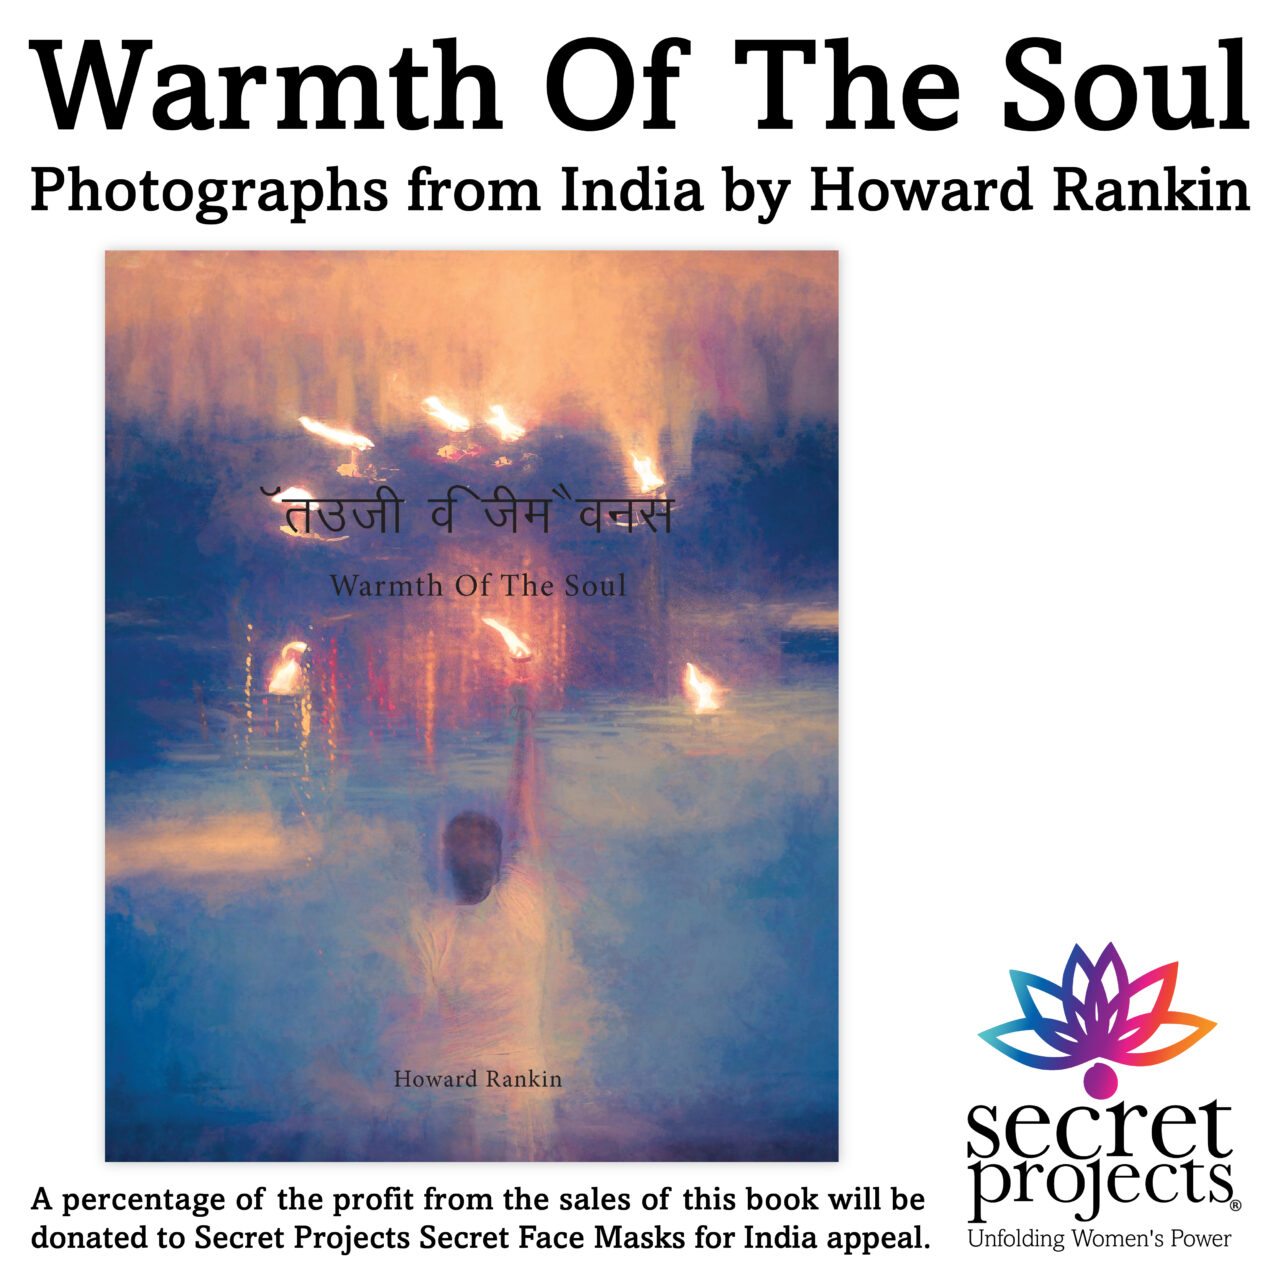 warmth-of-the-soul-a-photographic-reflection-of-a-deep-love-for-india-by-howard-rankin-profits-from-the-sale-of-the-book-will-be-given-to-sp